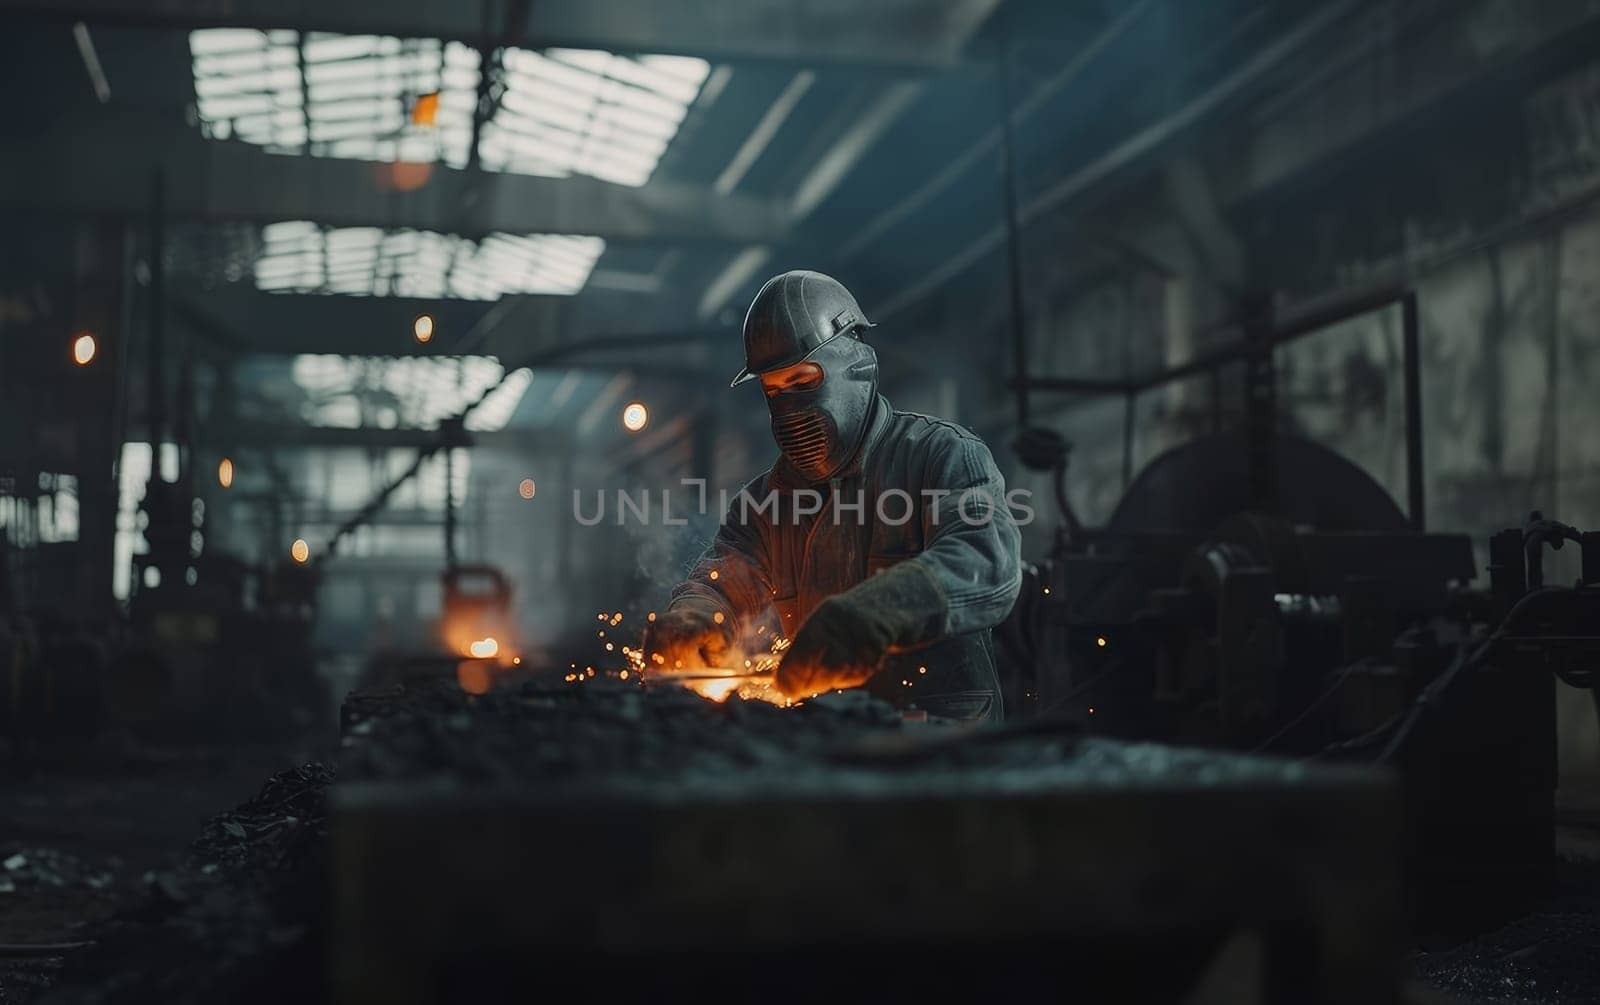 Welder in full gear ignites sparks while working on metal in a dimly lit shop. by sfinks